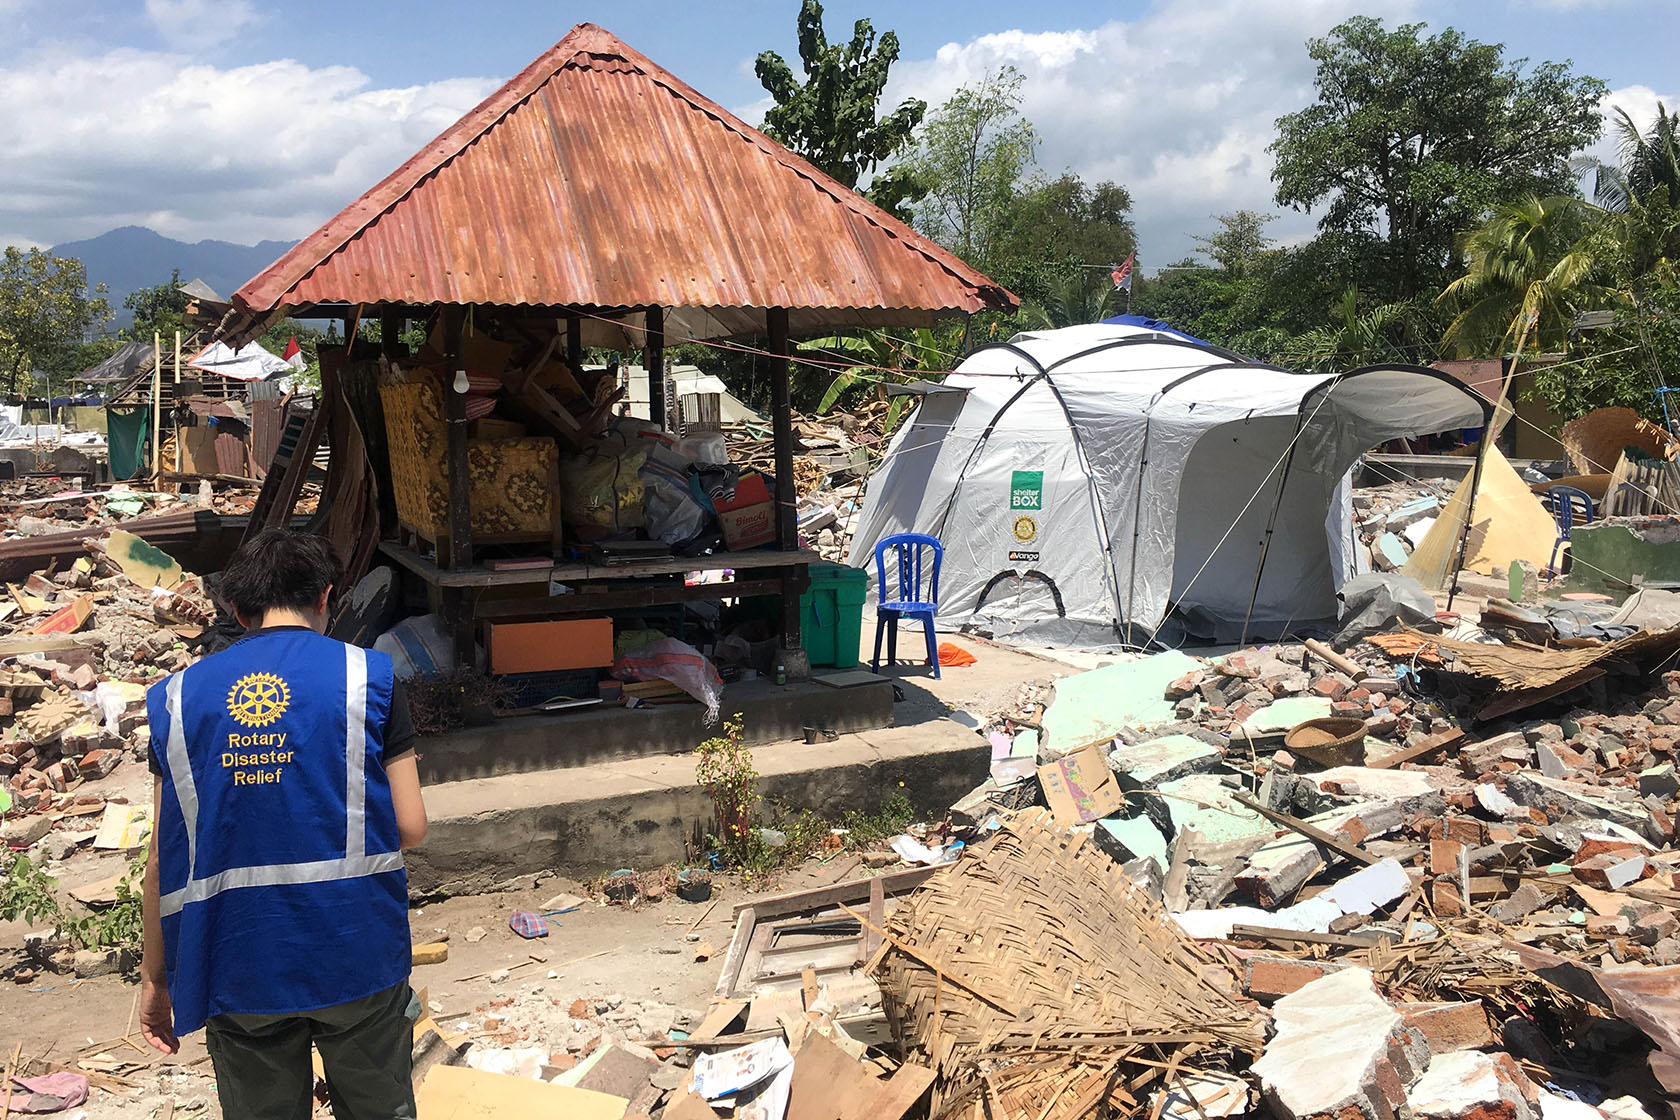 rotary disaster relief volunteer shelterbox tent indonesia earthquake